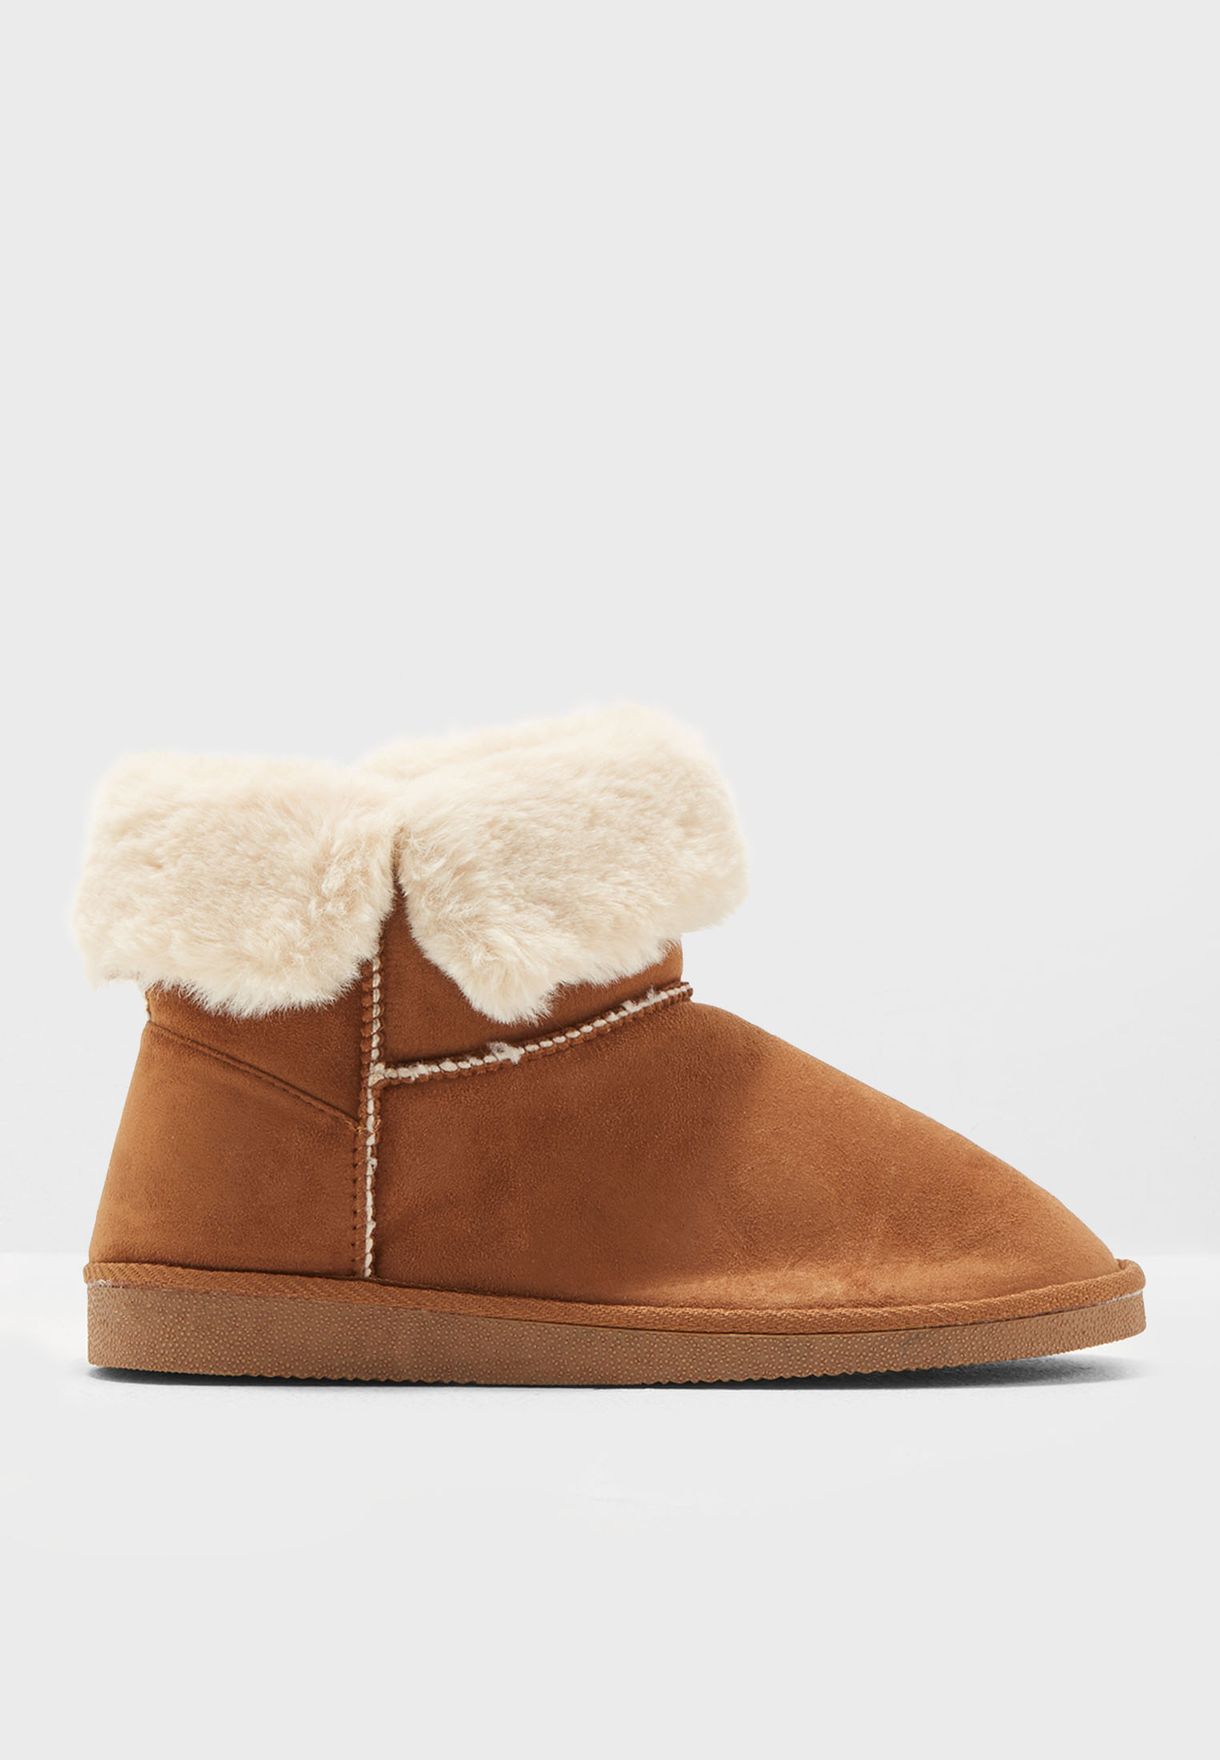 ugg boots new look